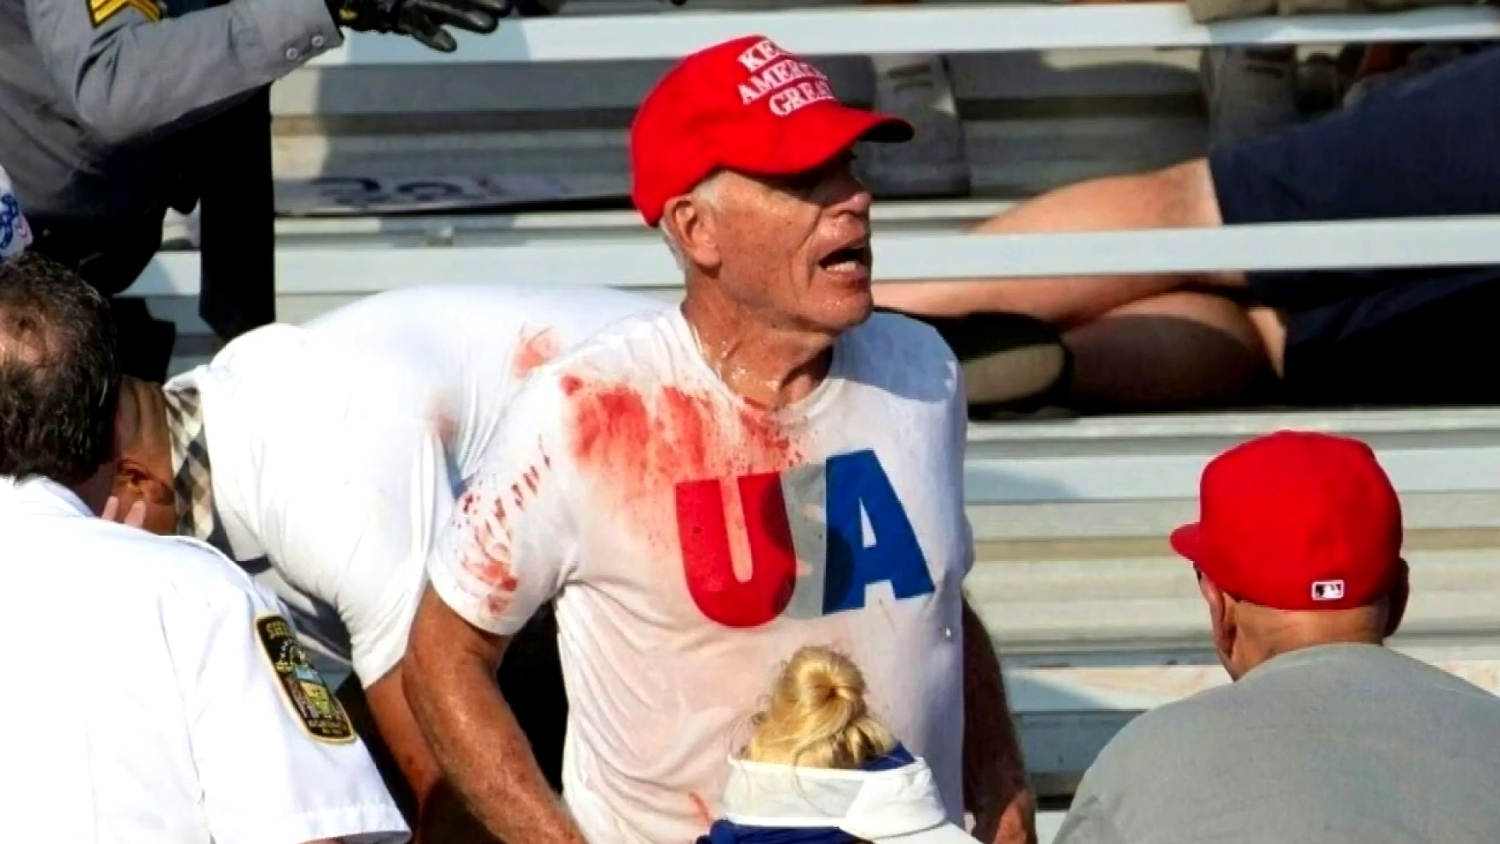 'I was covered with blood': ER doctor describes rush to help injured victims at Trump rally